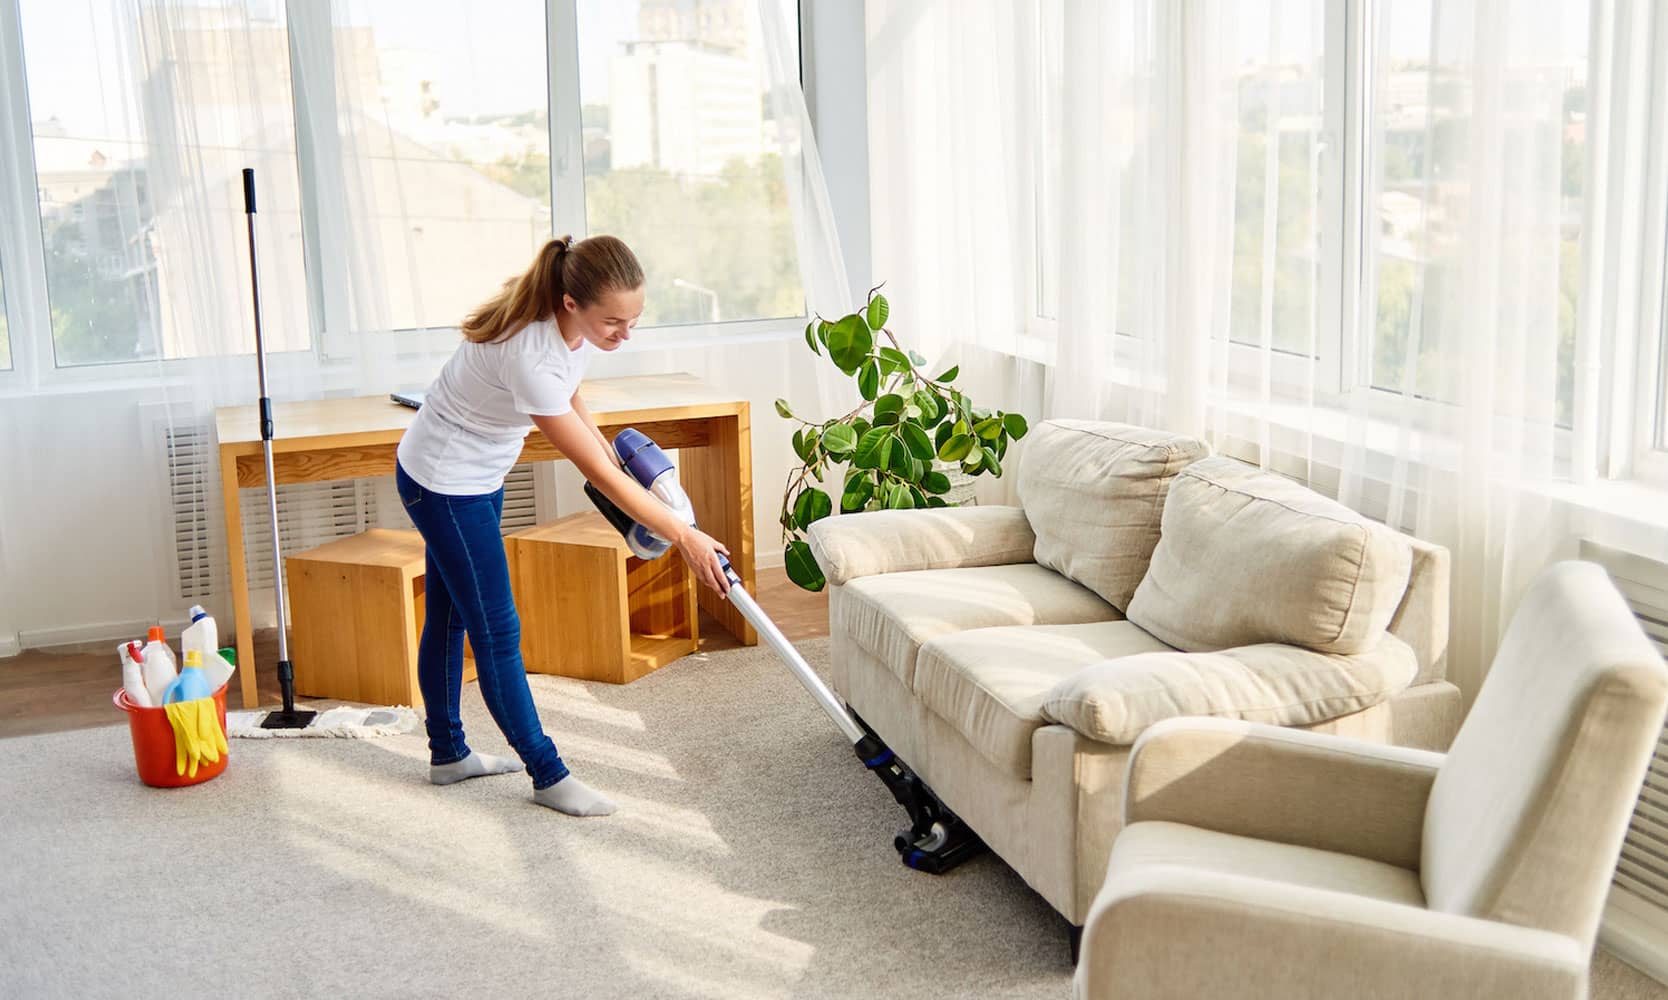 Cheltenham residents and businesses may benefit from a wide range of practical cleaning methods